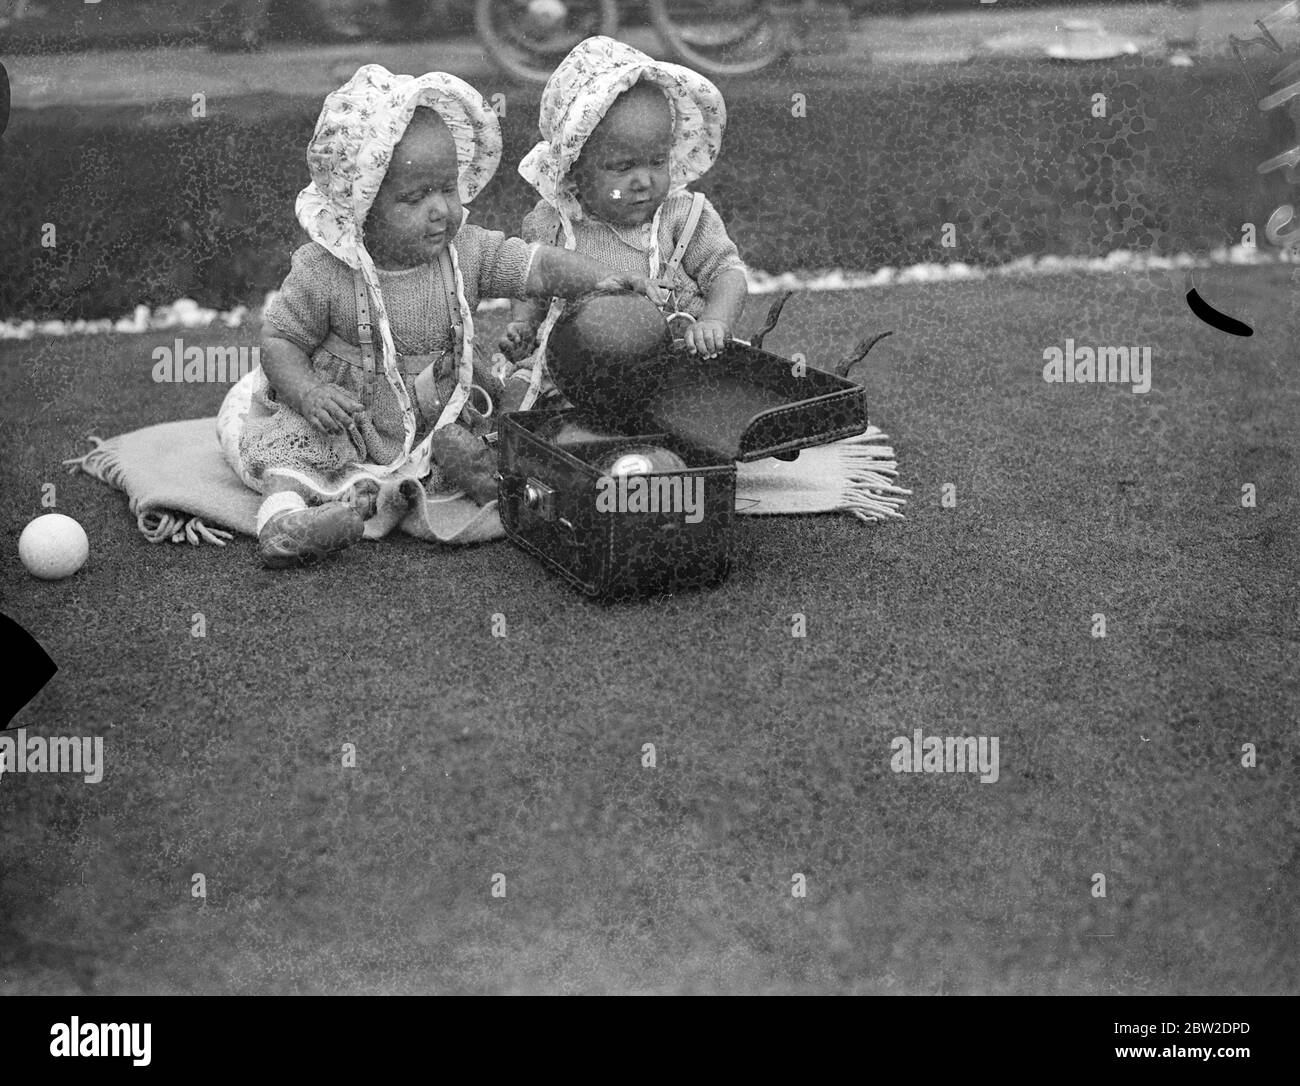 Jacqueline (left) getting ready to hand another bowl to Mrs Hallet as Jill watches her mother in play. The ten months old twins accompanied their mother when she competed in the singles events of the women's National Bowls Championships at Wimbledon Park, London. 26 August 1937 Stock Photo